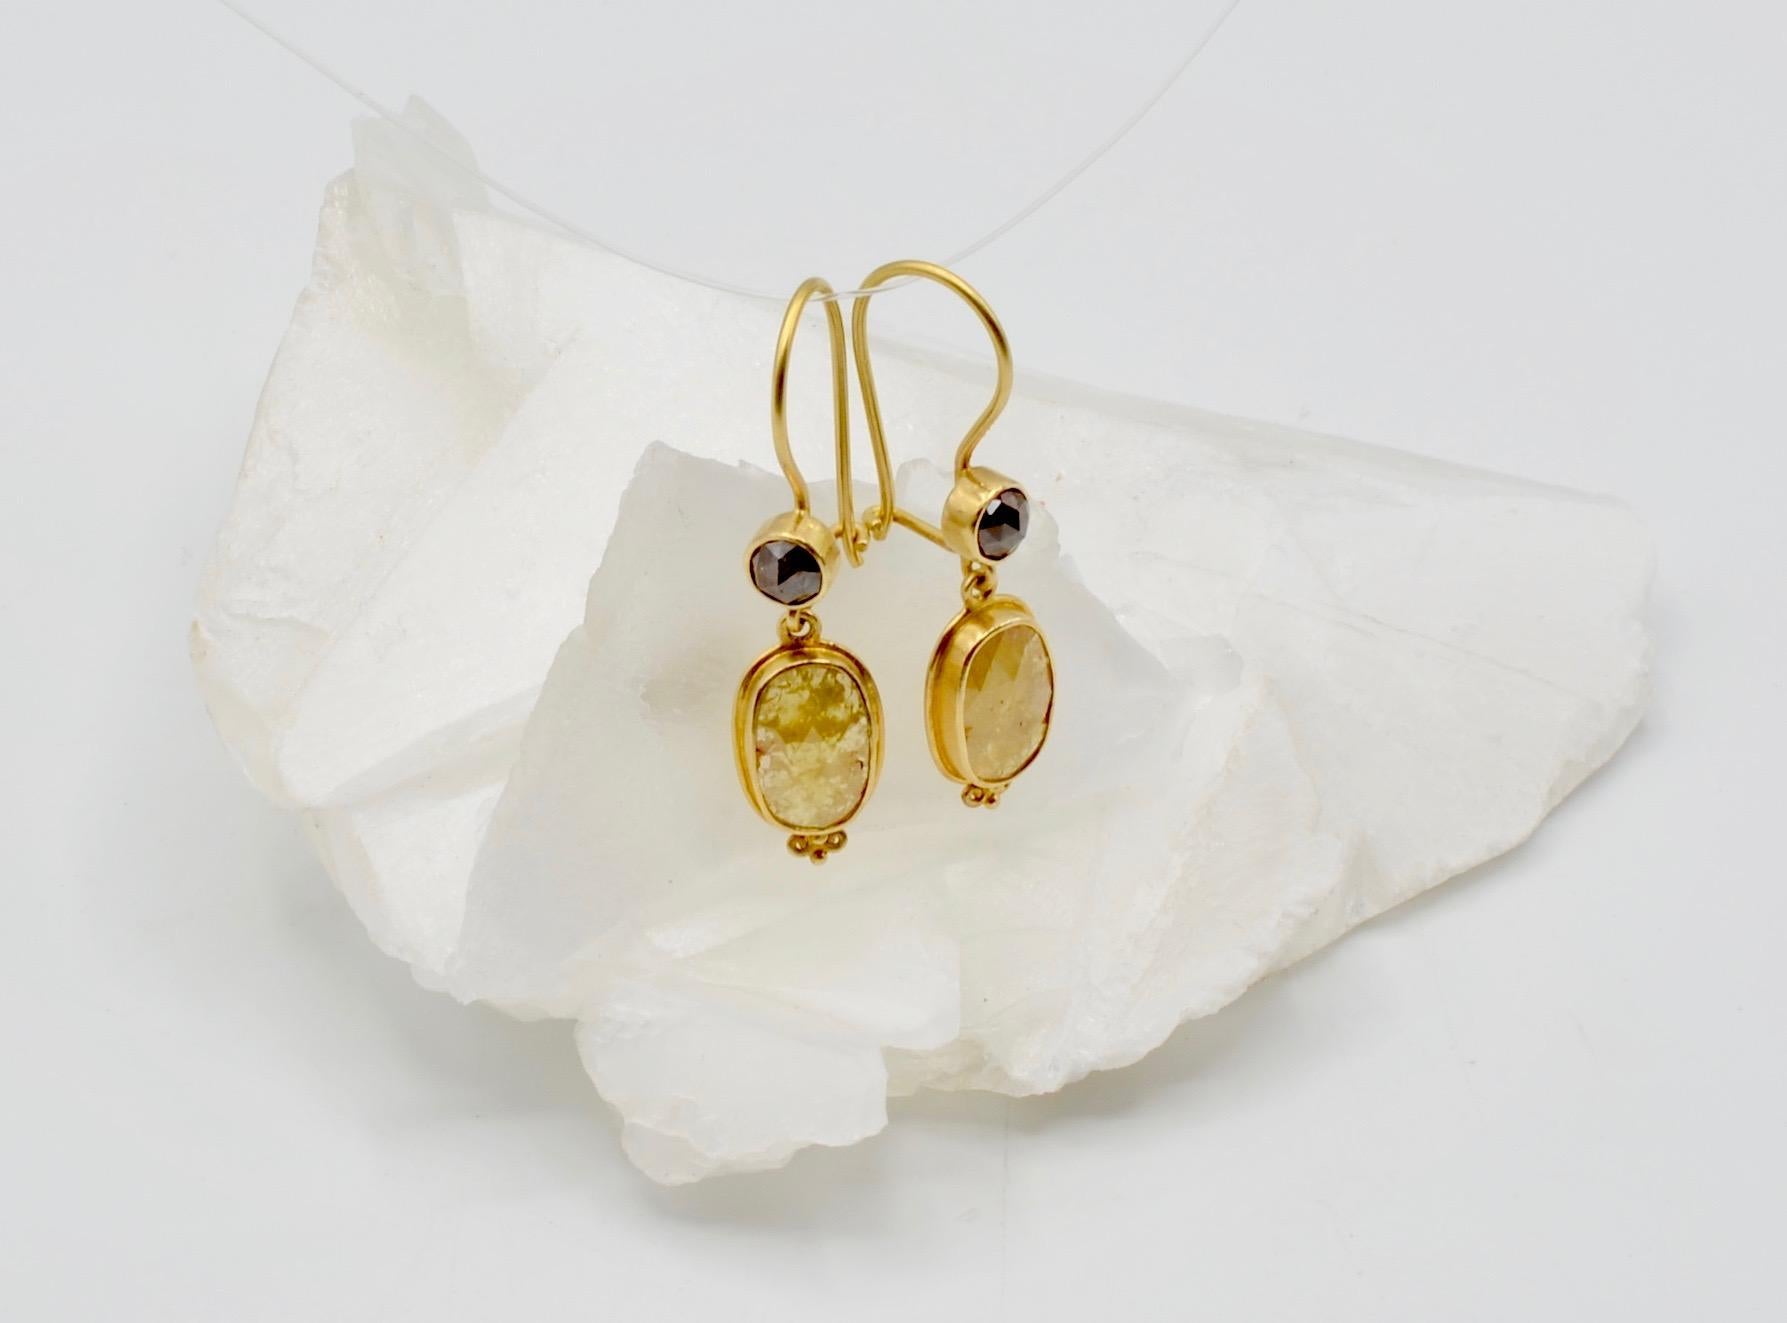 Diamonds come in all shades and colors. This pair Steven Battelle designed pair of earrings is a lovely combination of chocolate and deep yellow diamonds in a drop style that is timeless and classic. The total weight is 3.0 carats of dazzling